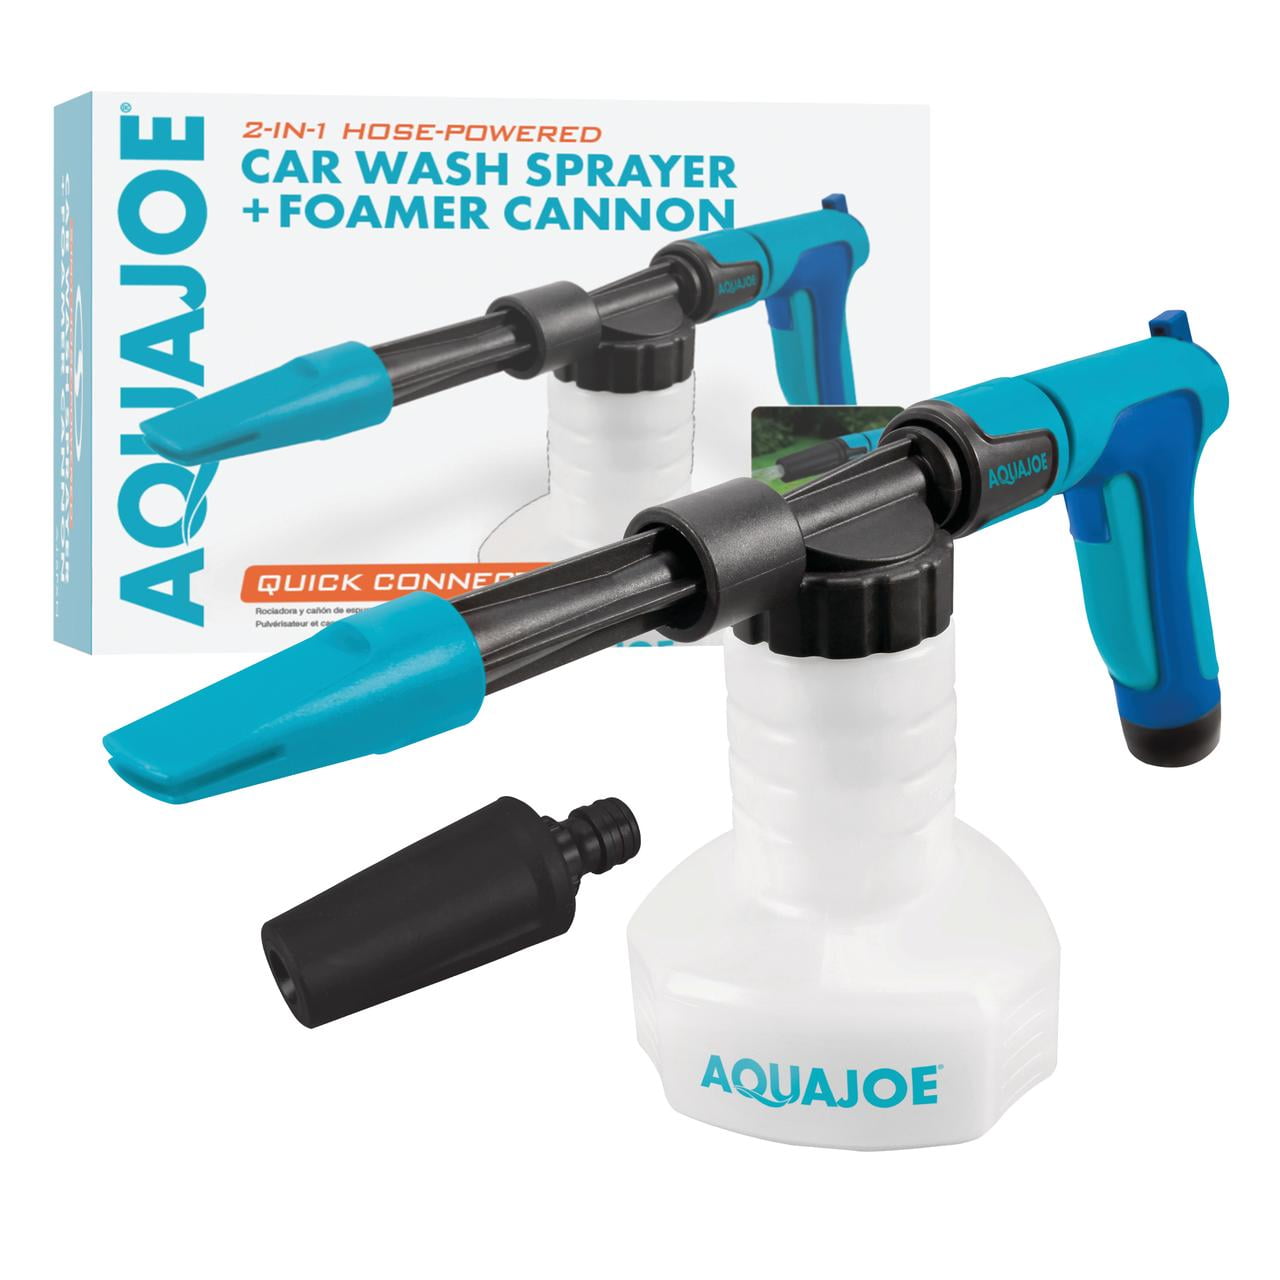 SprayPlus Foam Cannon: 2L High Pressure Pump Car Wash & Window Cleaning  Tool With Adjustable Nozzle, Ideal For Home Use Y200106 From Long10, $20.24